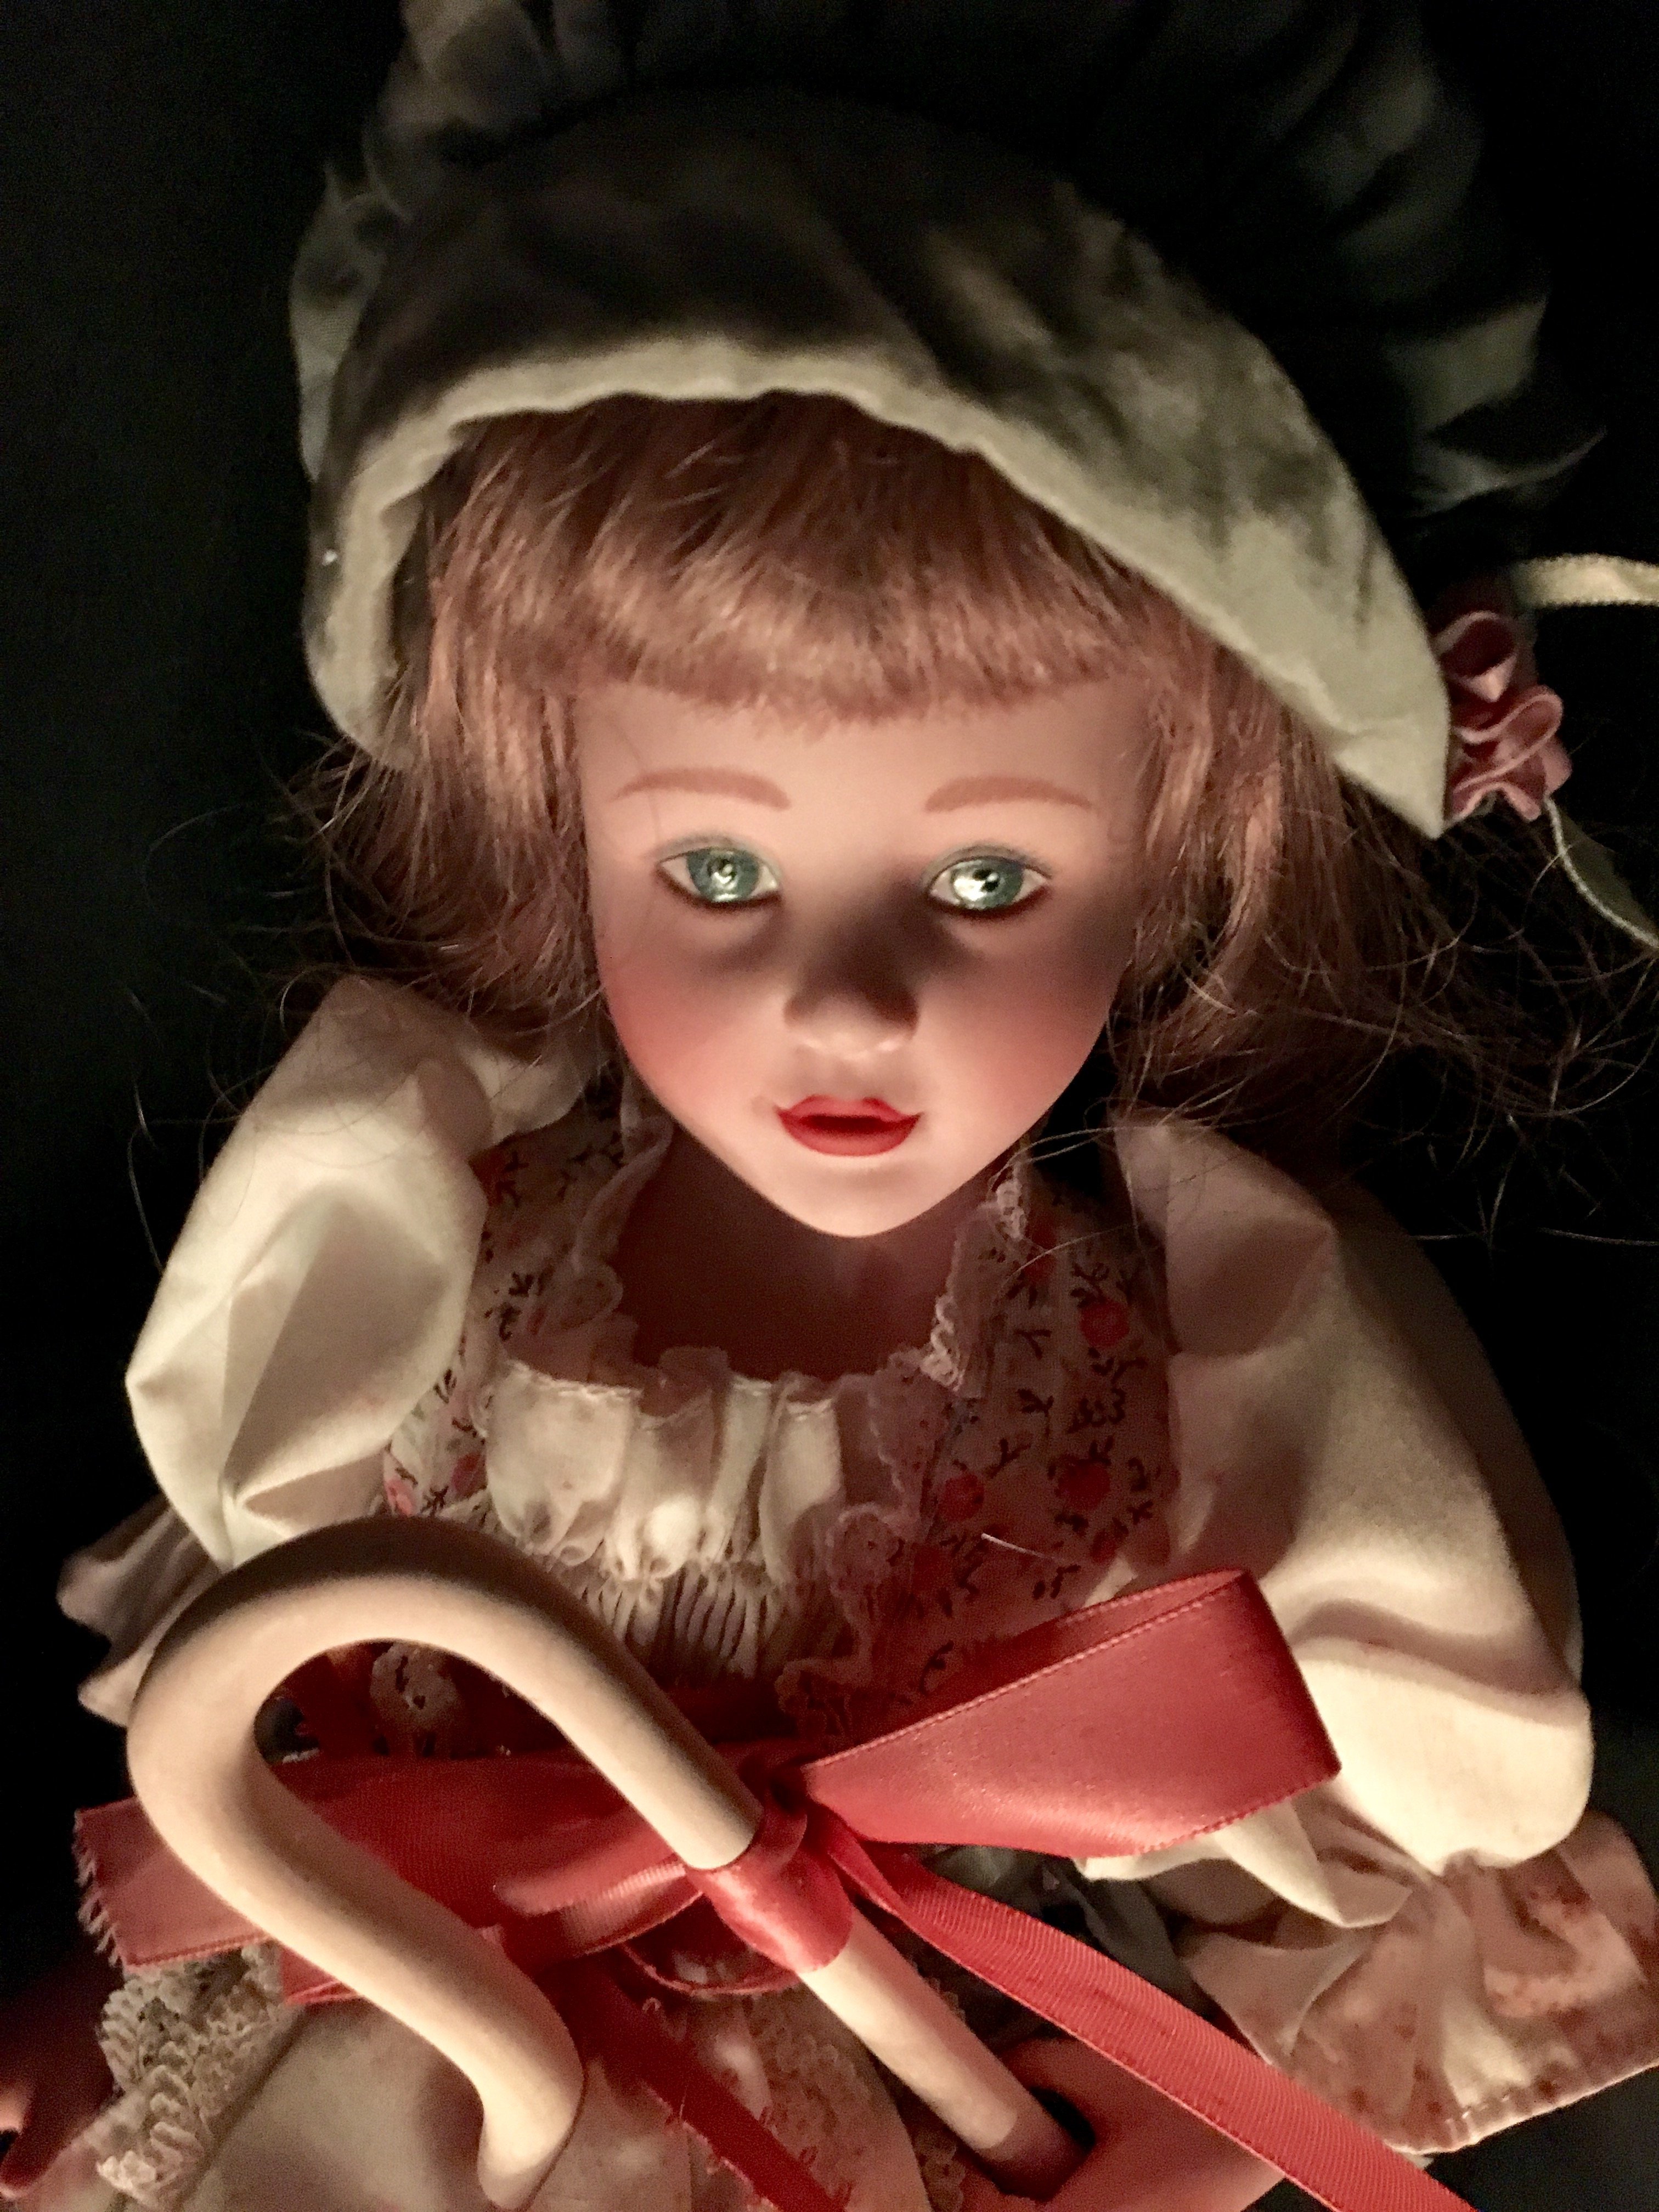 And there's the Creepy Doll | I've decided to set up a separ… | Flickr